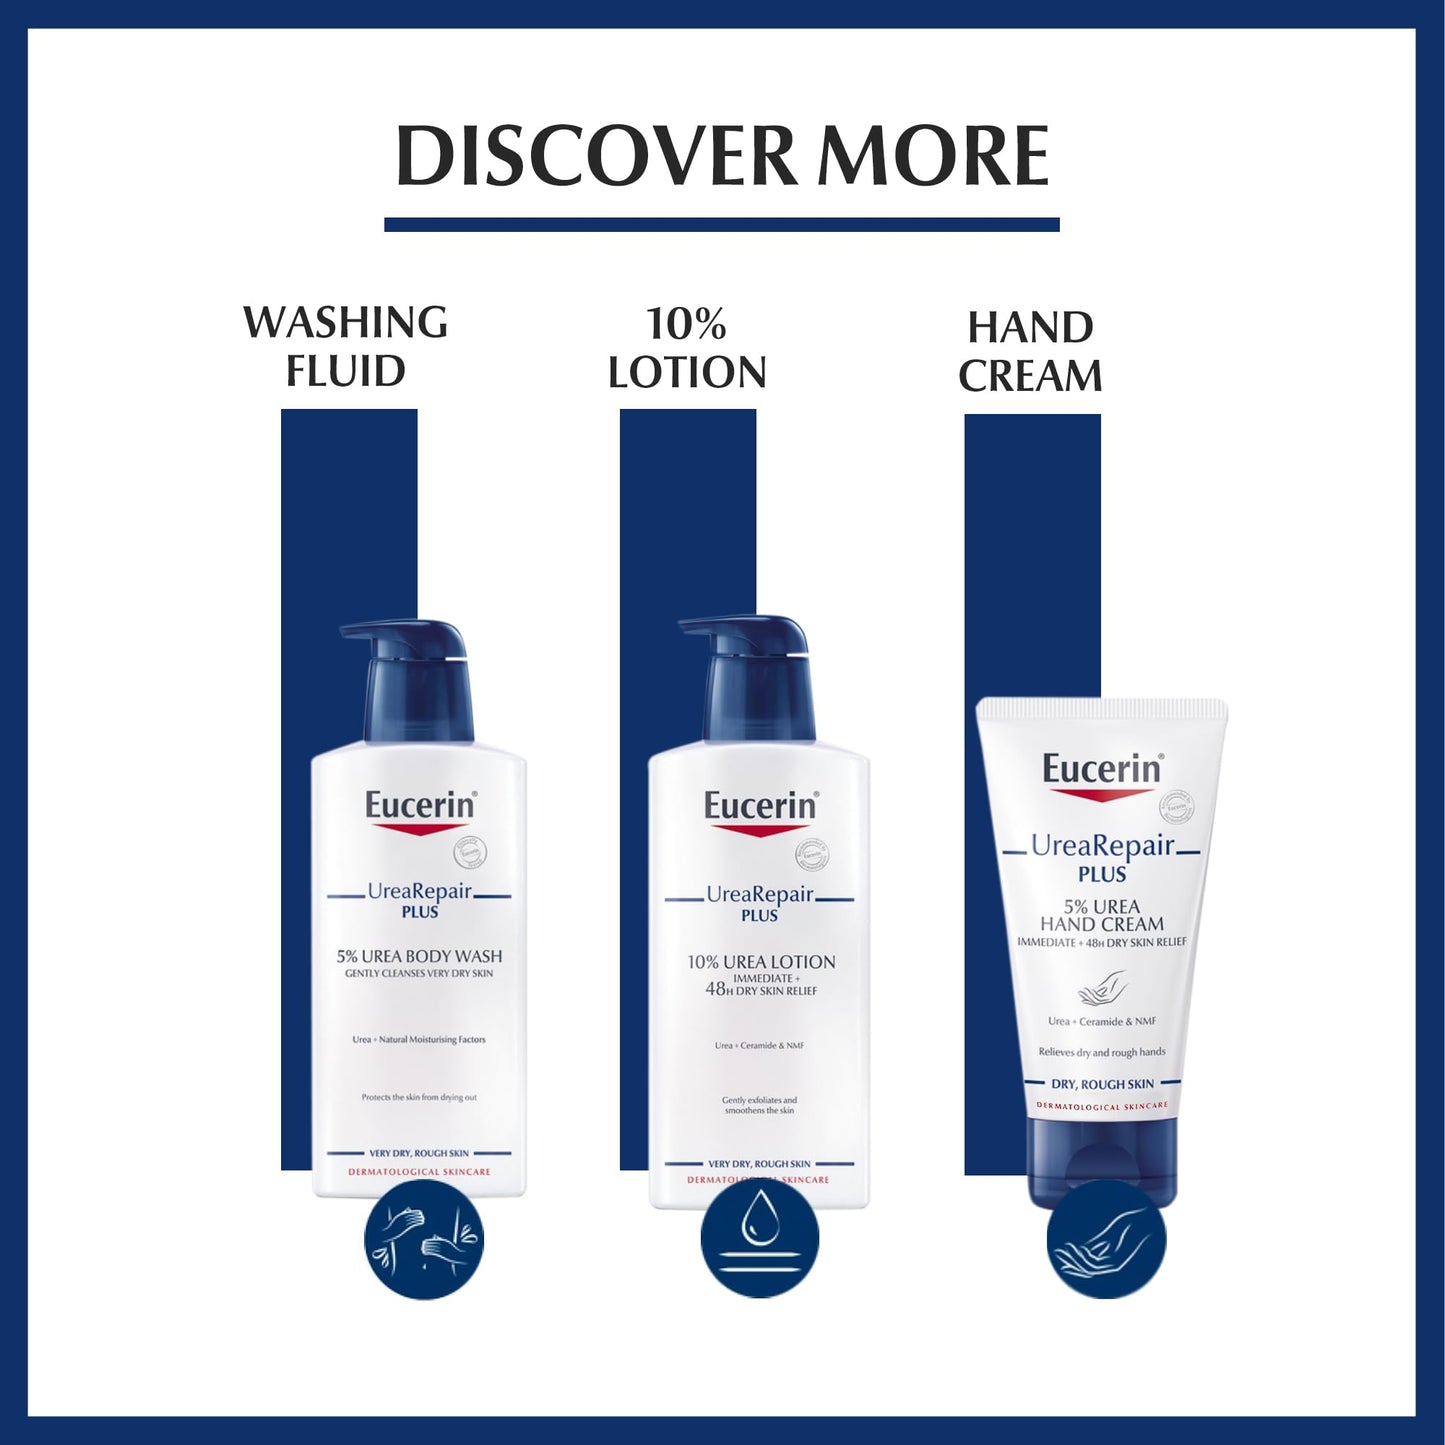 Eucerin UreaRepair Plus 10% Urea Foot Cream with Ceramide, Smoothes Callouses and Thickened Heels, Feet Care for Very Dry Skin, Suitable for Mature & Diabetic Skin, 100ml